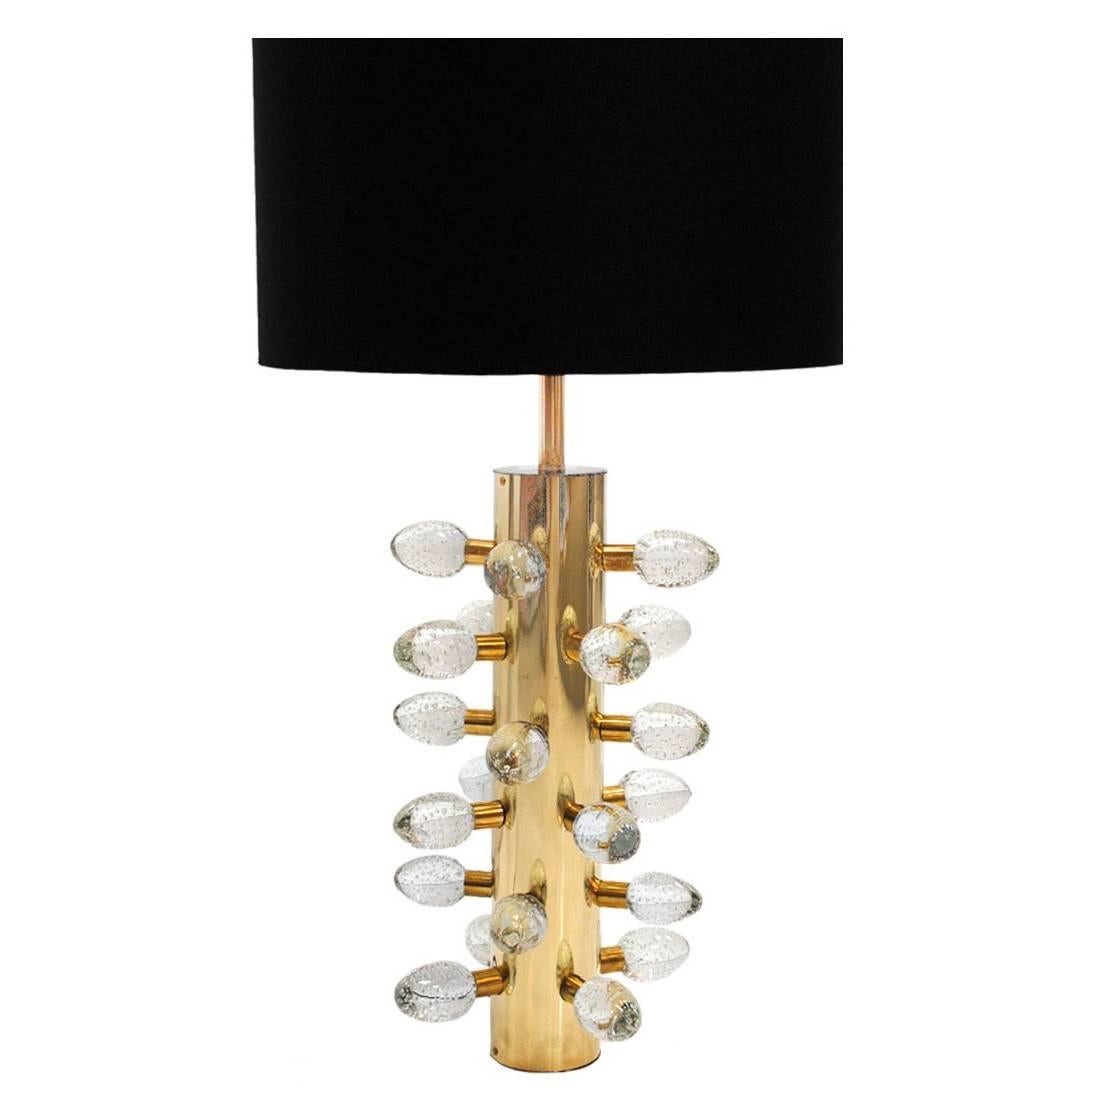 Contemporary Italian pair of table lamps. Cylindrical structure made os brass with clear murano glass pieces.

Dimensions of the structure: D 31 cm x H 73 cm
Dimensions of the lampshade: D 50 cm x H 25 cm.

Every item LA Studio offers is checked by